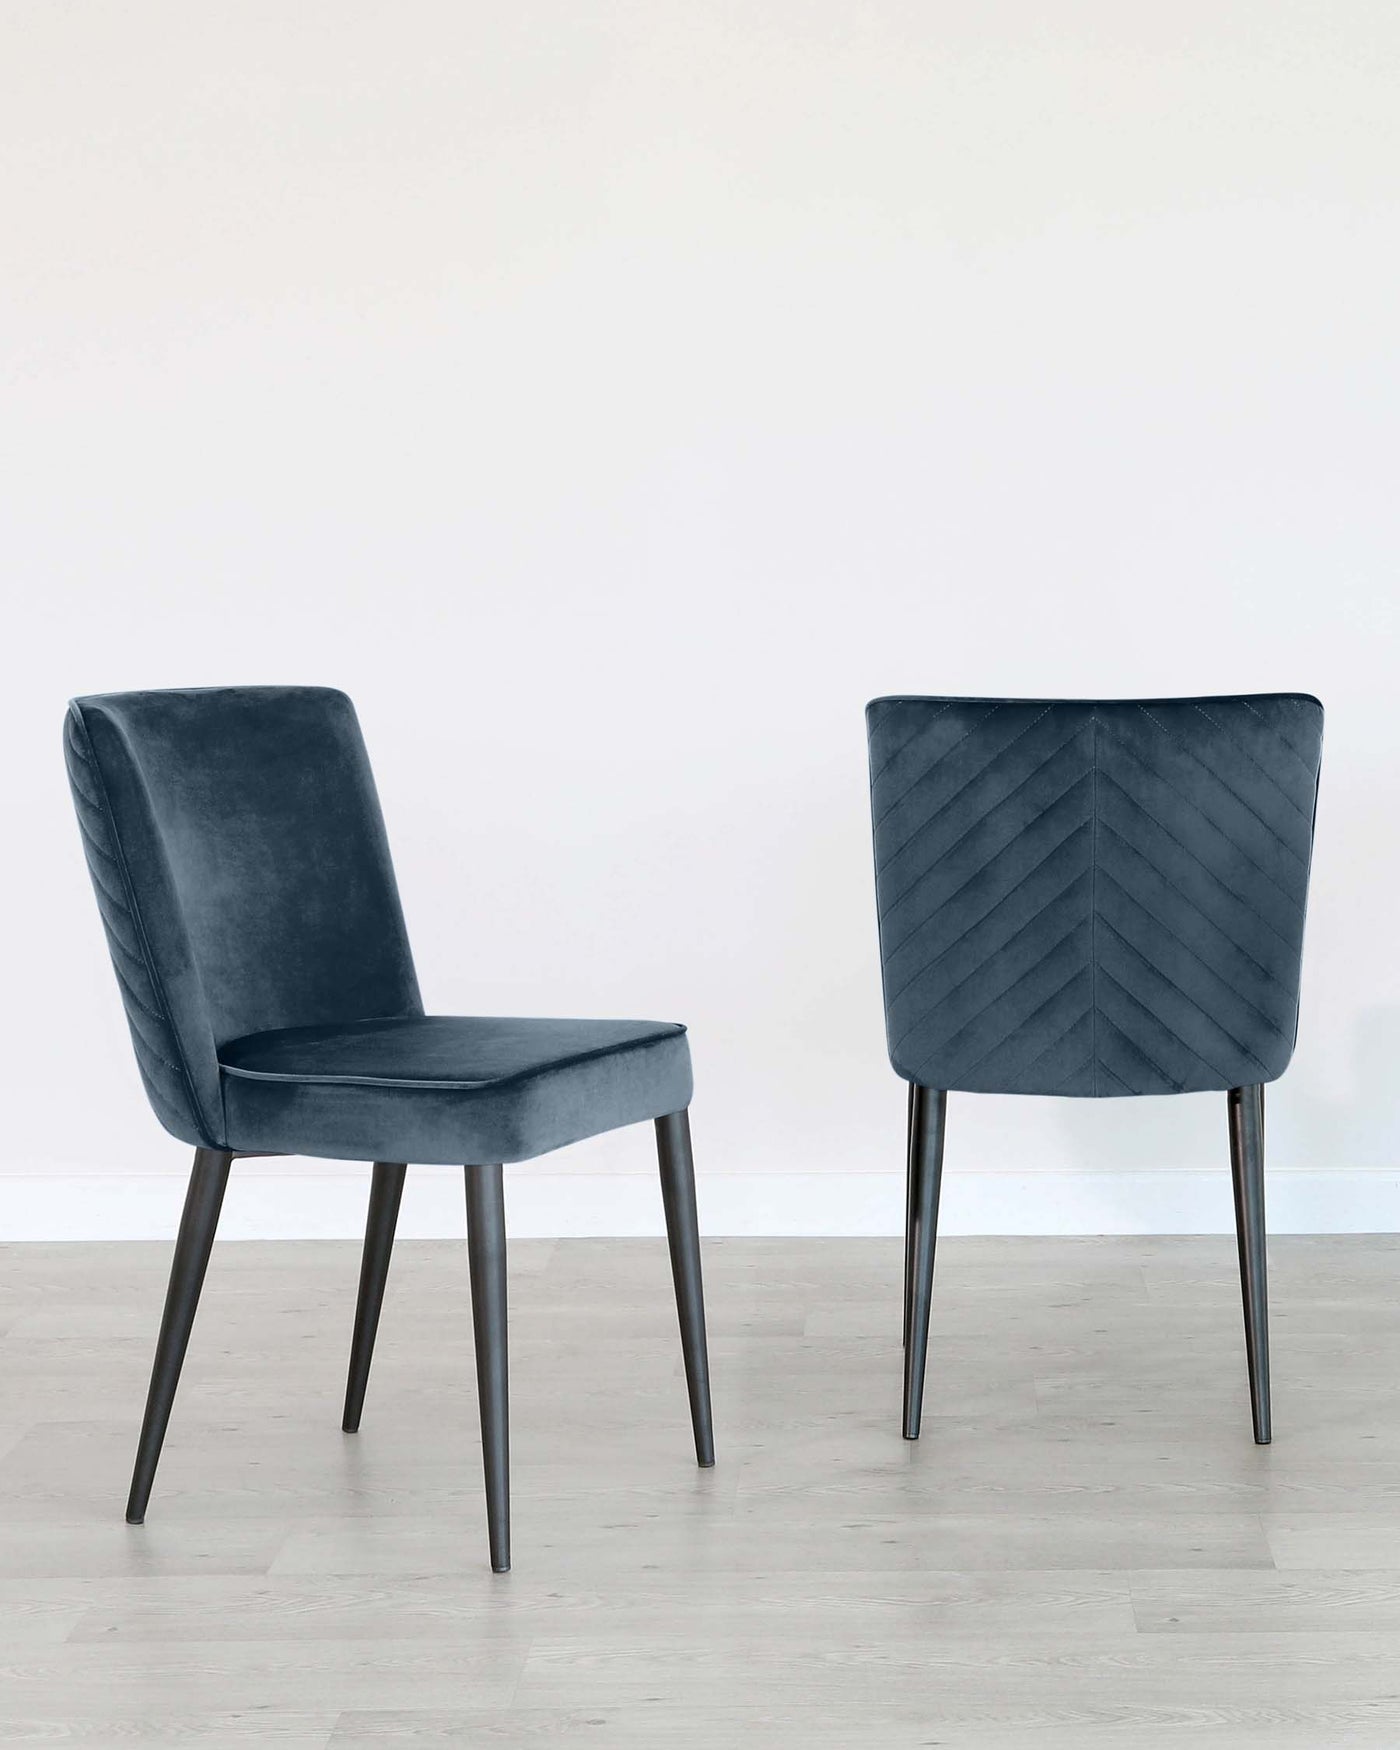 Two modern upholstered dining chairs with dark grey fabric and black metal legs, one featuring a smooth front and the other with a diagonally stitched backrest, standing on a light hardwood floor against a white wall.